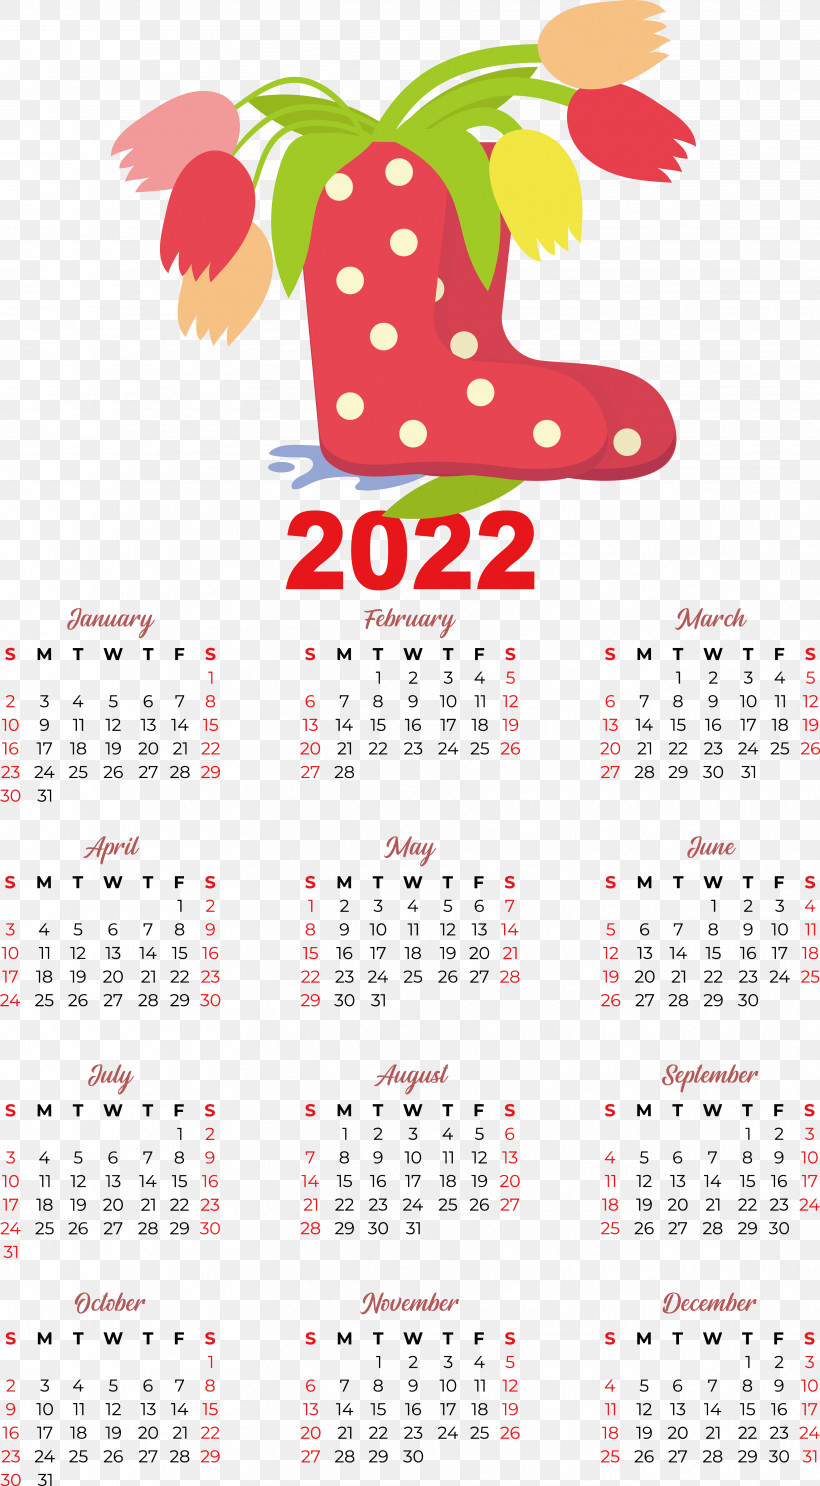 Calendar Knuckle Mnemonic The Victory! Royalty-free 2022, PNG, 3449x6253px, Calendar, Clip Art Graphics, Knuckle Mnemonic, Maya Calendar, Royaltyfree Download Free